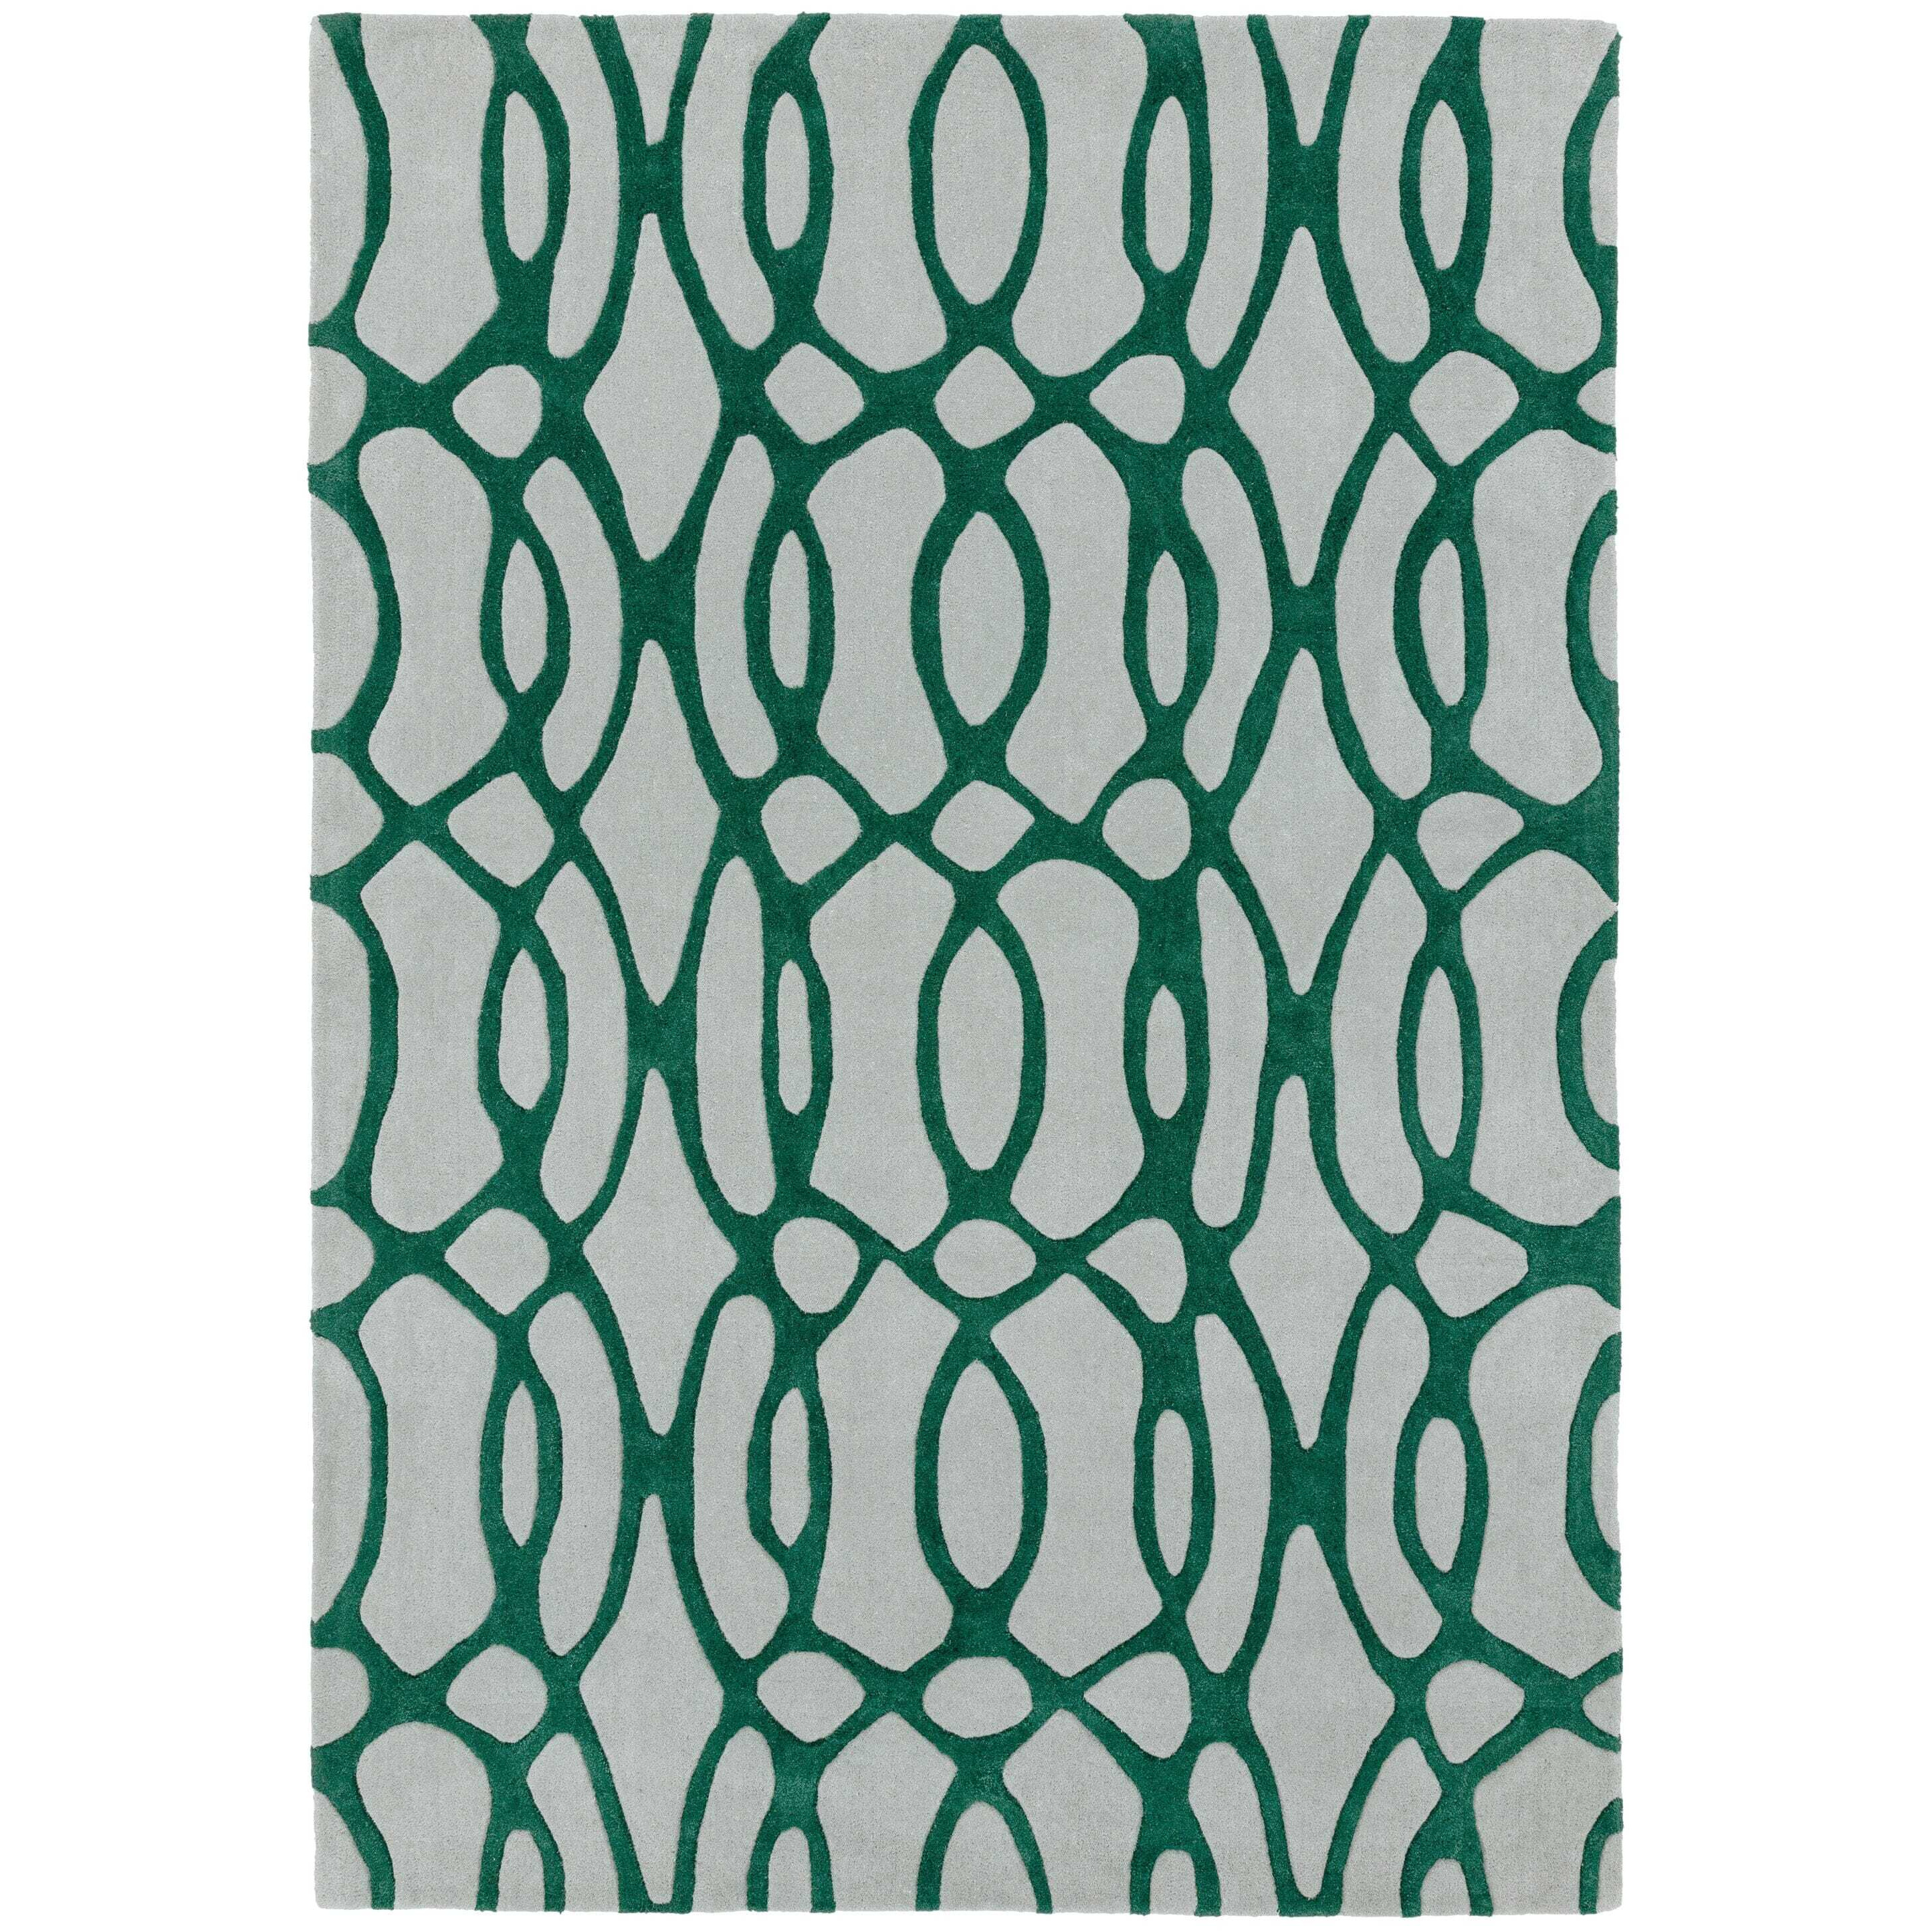 Asiatic Carpets Matrix Hand Tufted Rug Wire Green - 200 x 300cm - image 1